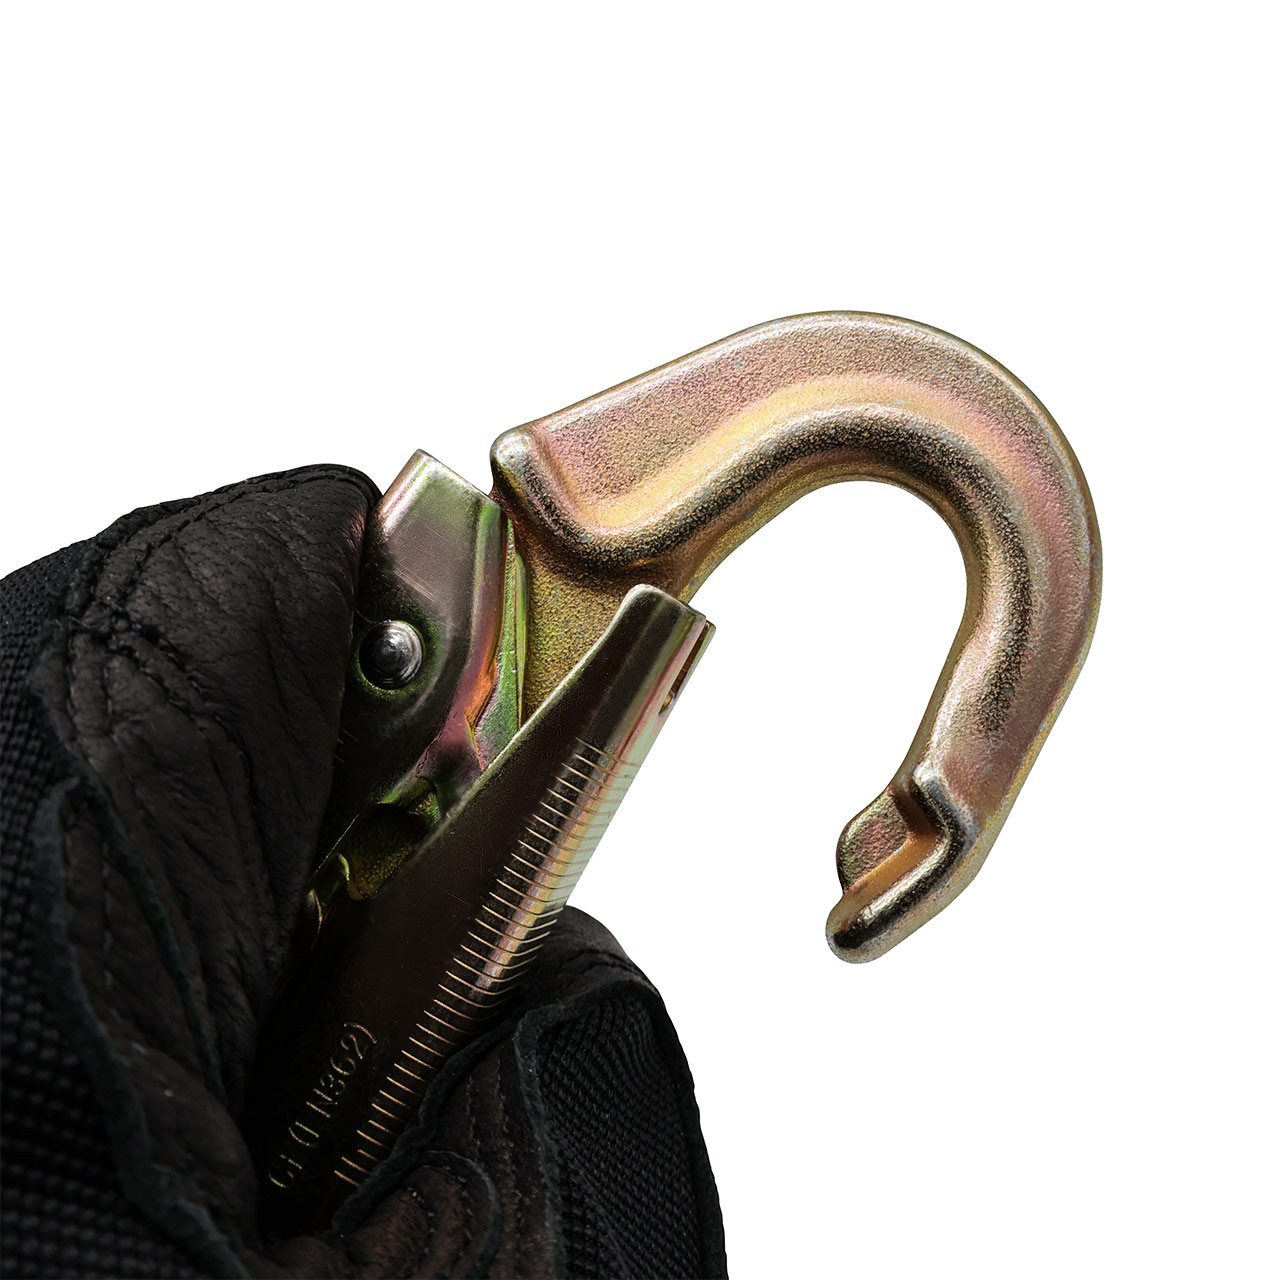 Double Action Forged Steel Swivel Snap Hook - Climbing Hooks